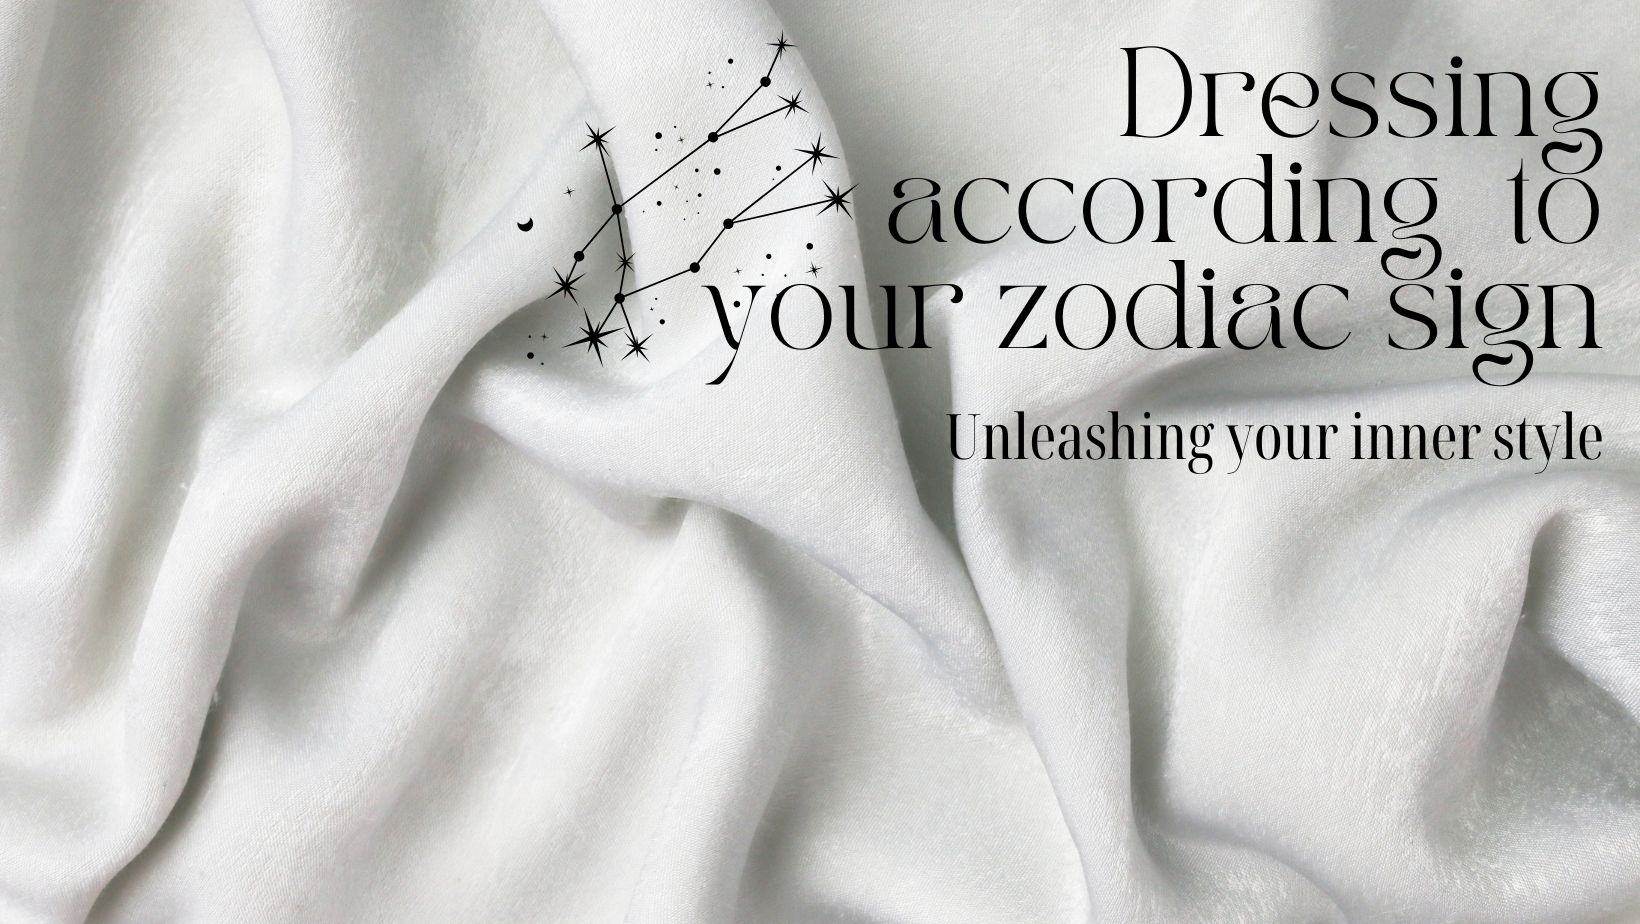 Dressing according to your zodiac sign